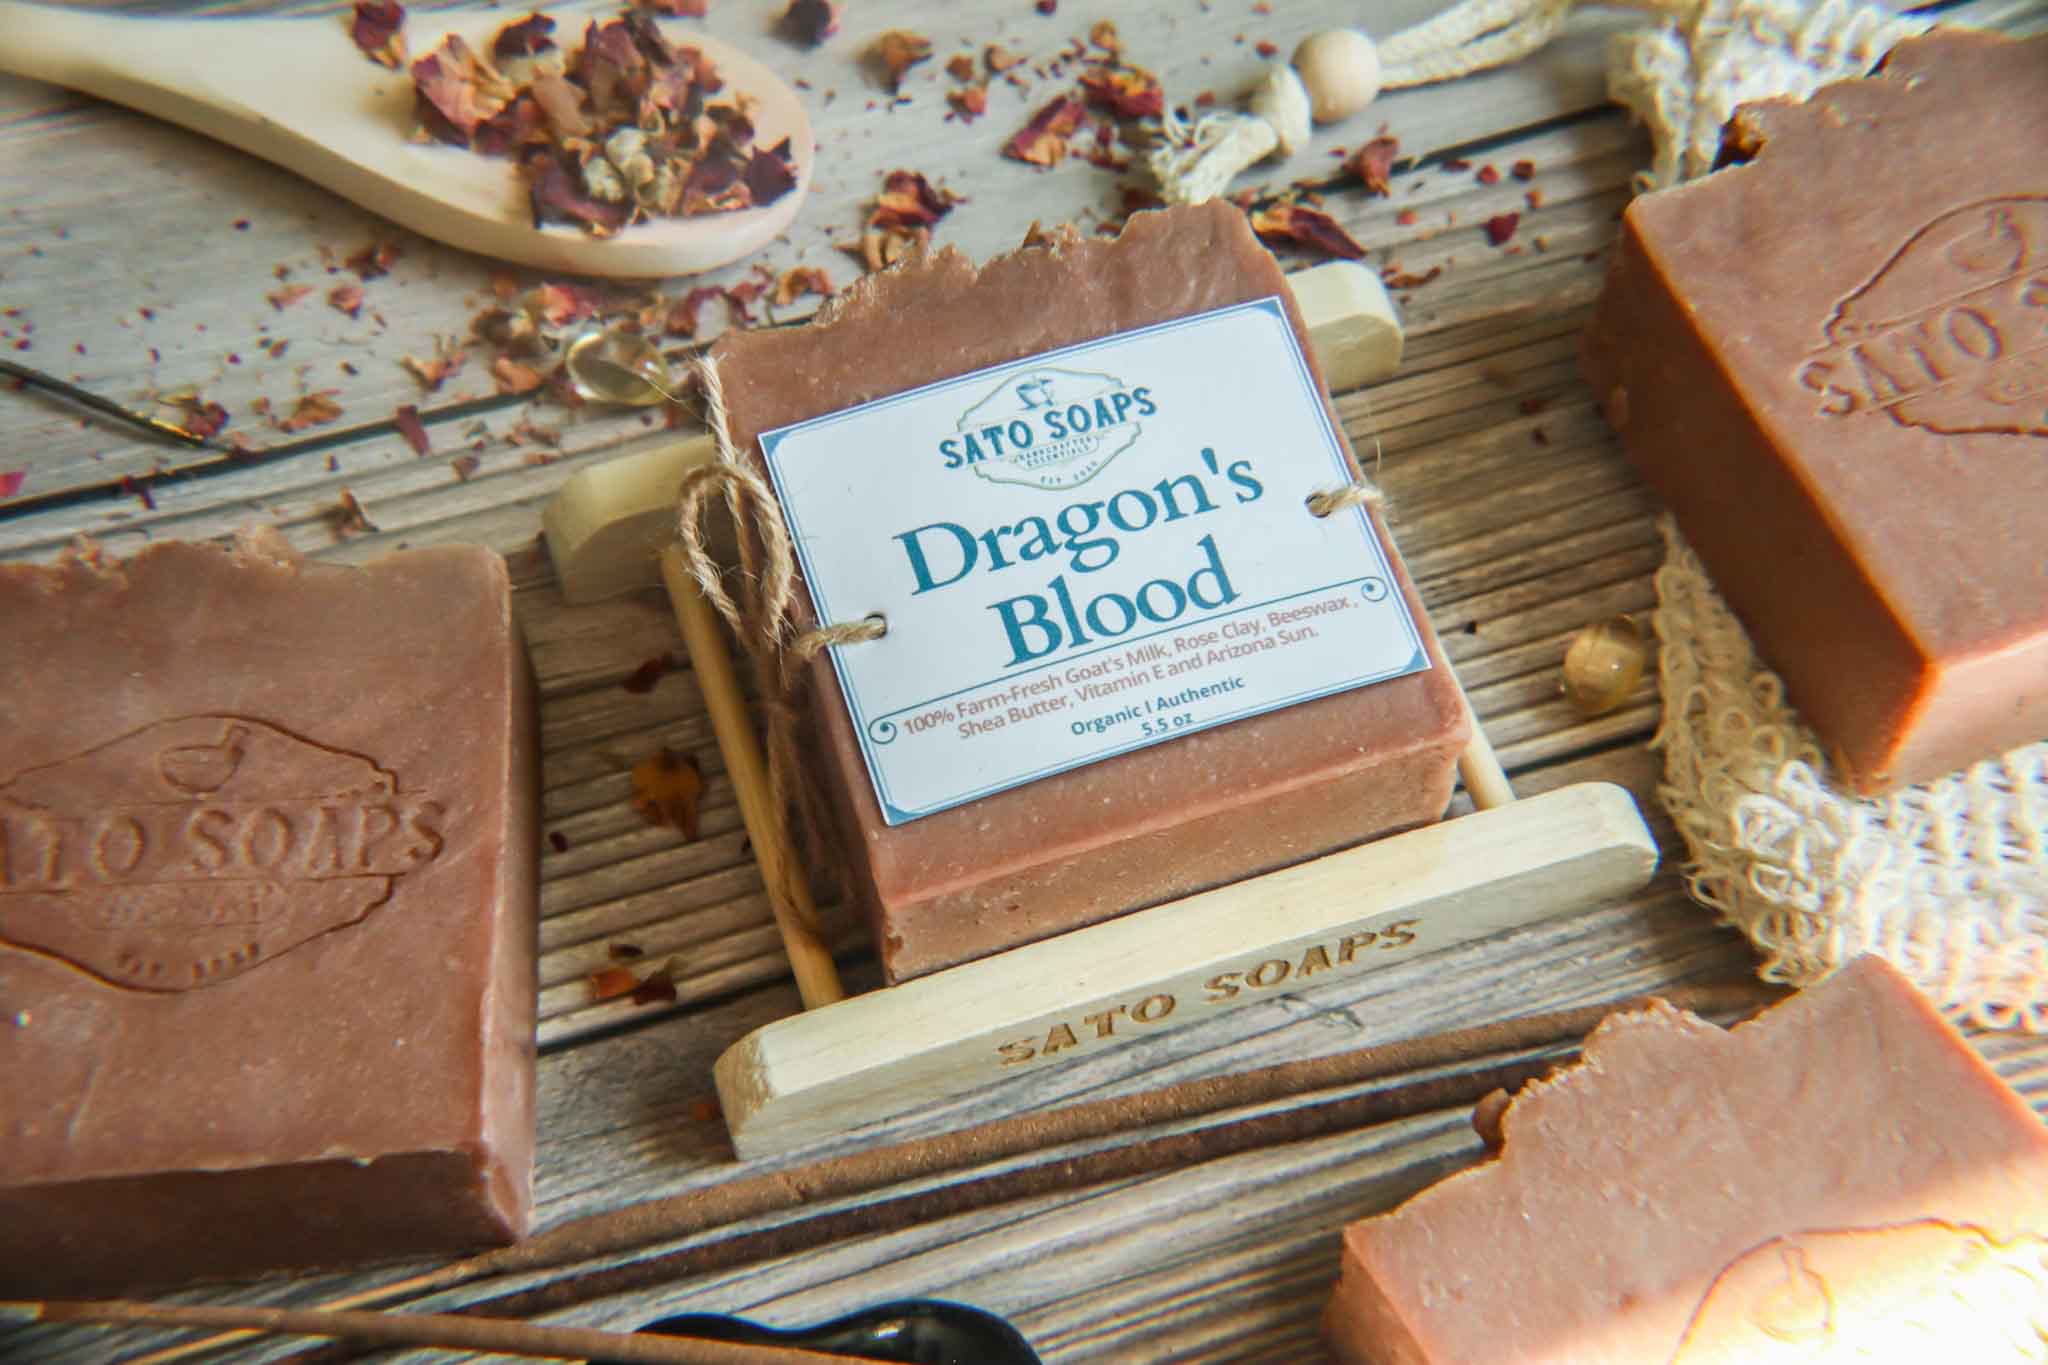 Dragon's Blood Luxurious Goatmilk with Shea Butter and Rose Clay Body Soap Bar